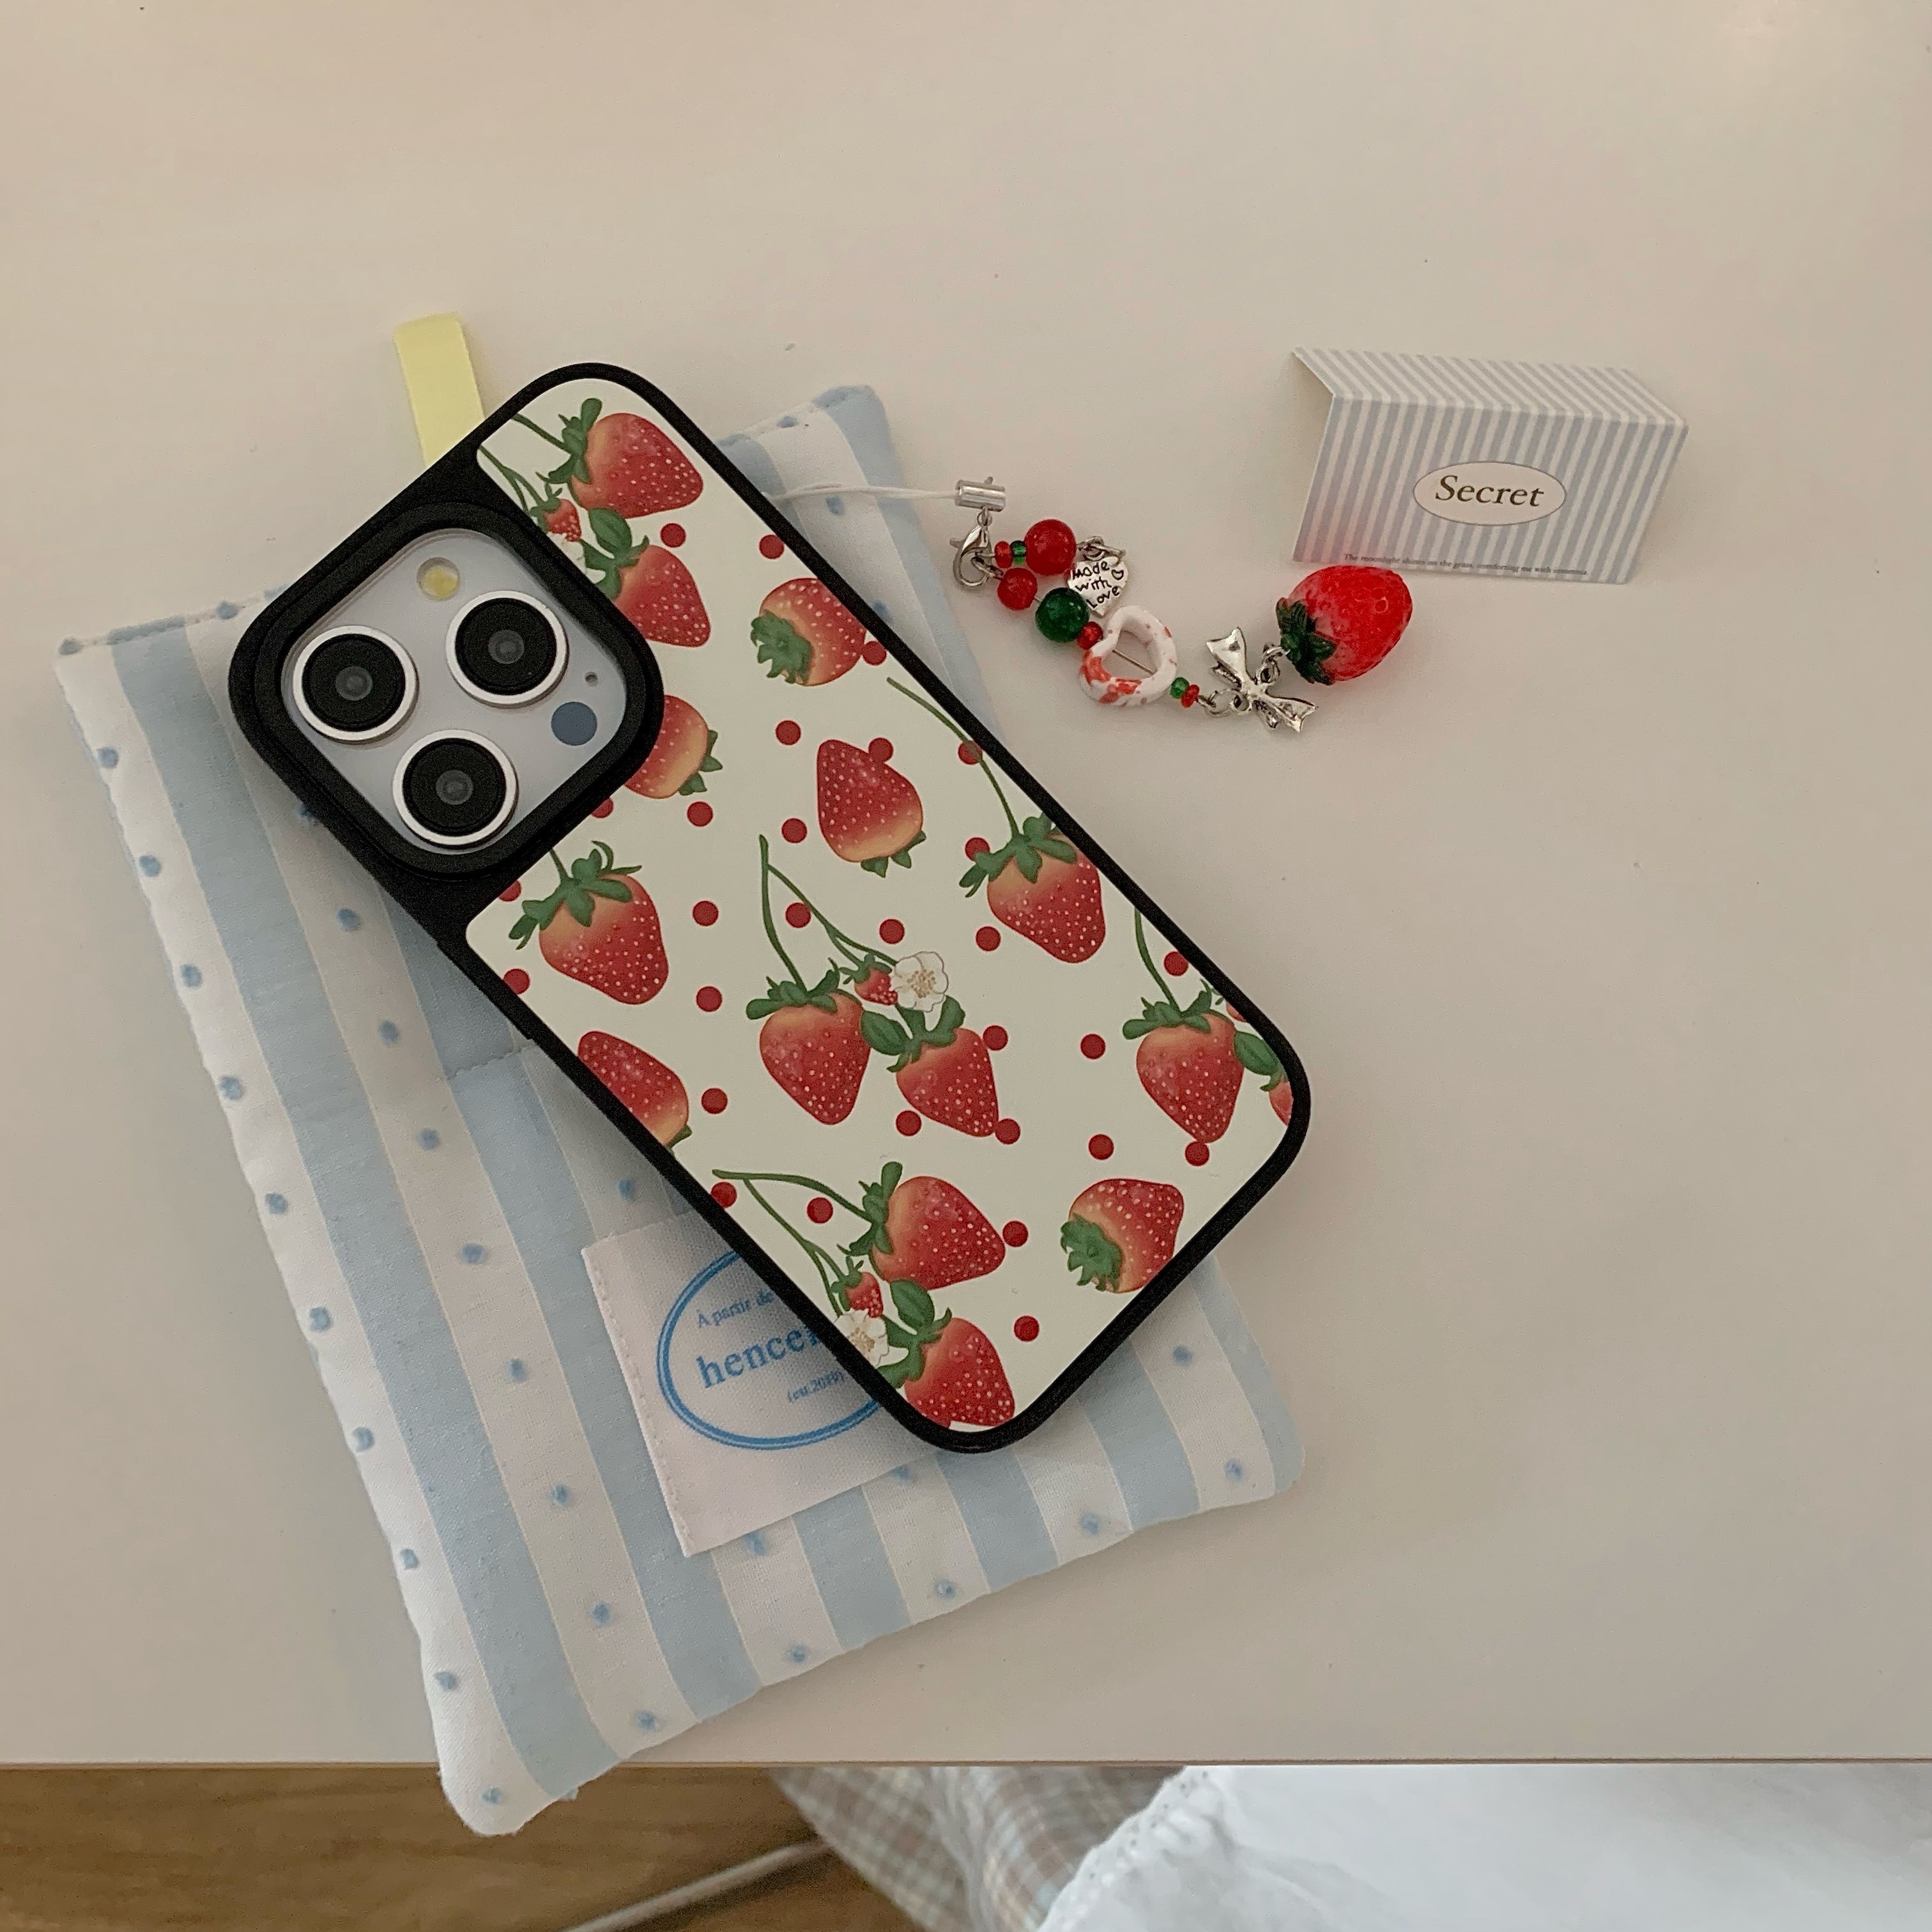 

Cartoon Strawberry Design Tpu Case With Wrist Chain For Iphone 12/13/14/15 Pro Max - Cute Durable Protective Cover With Hand Strap